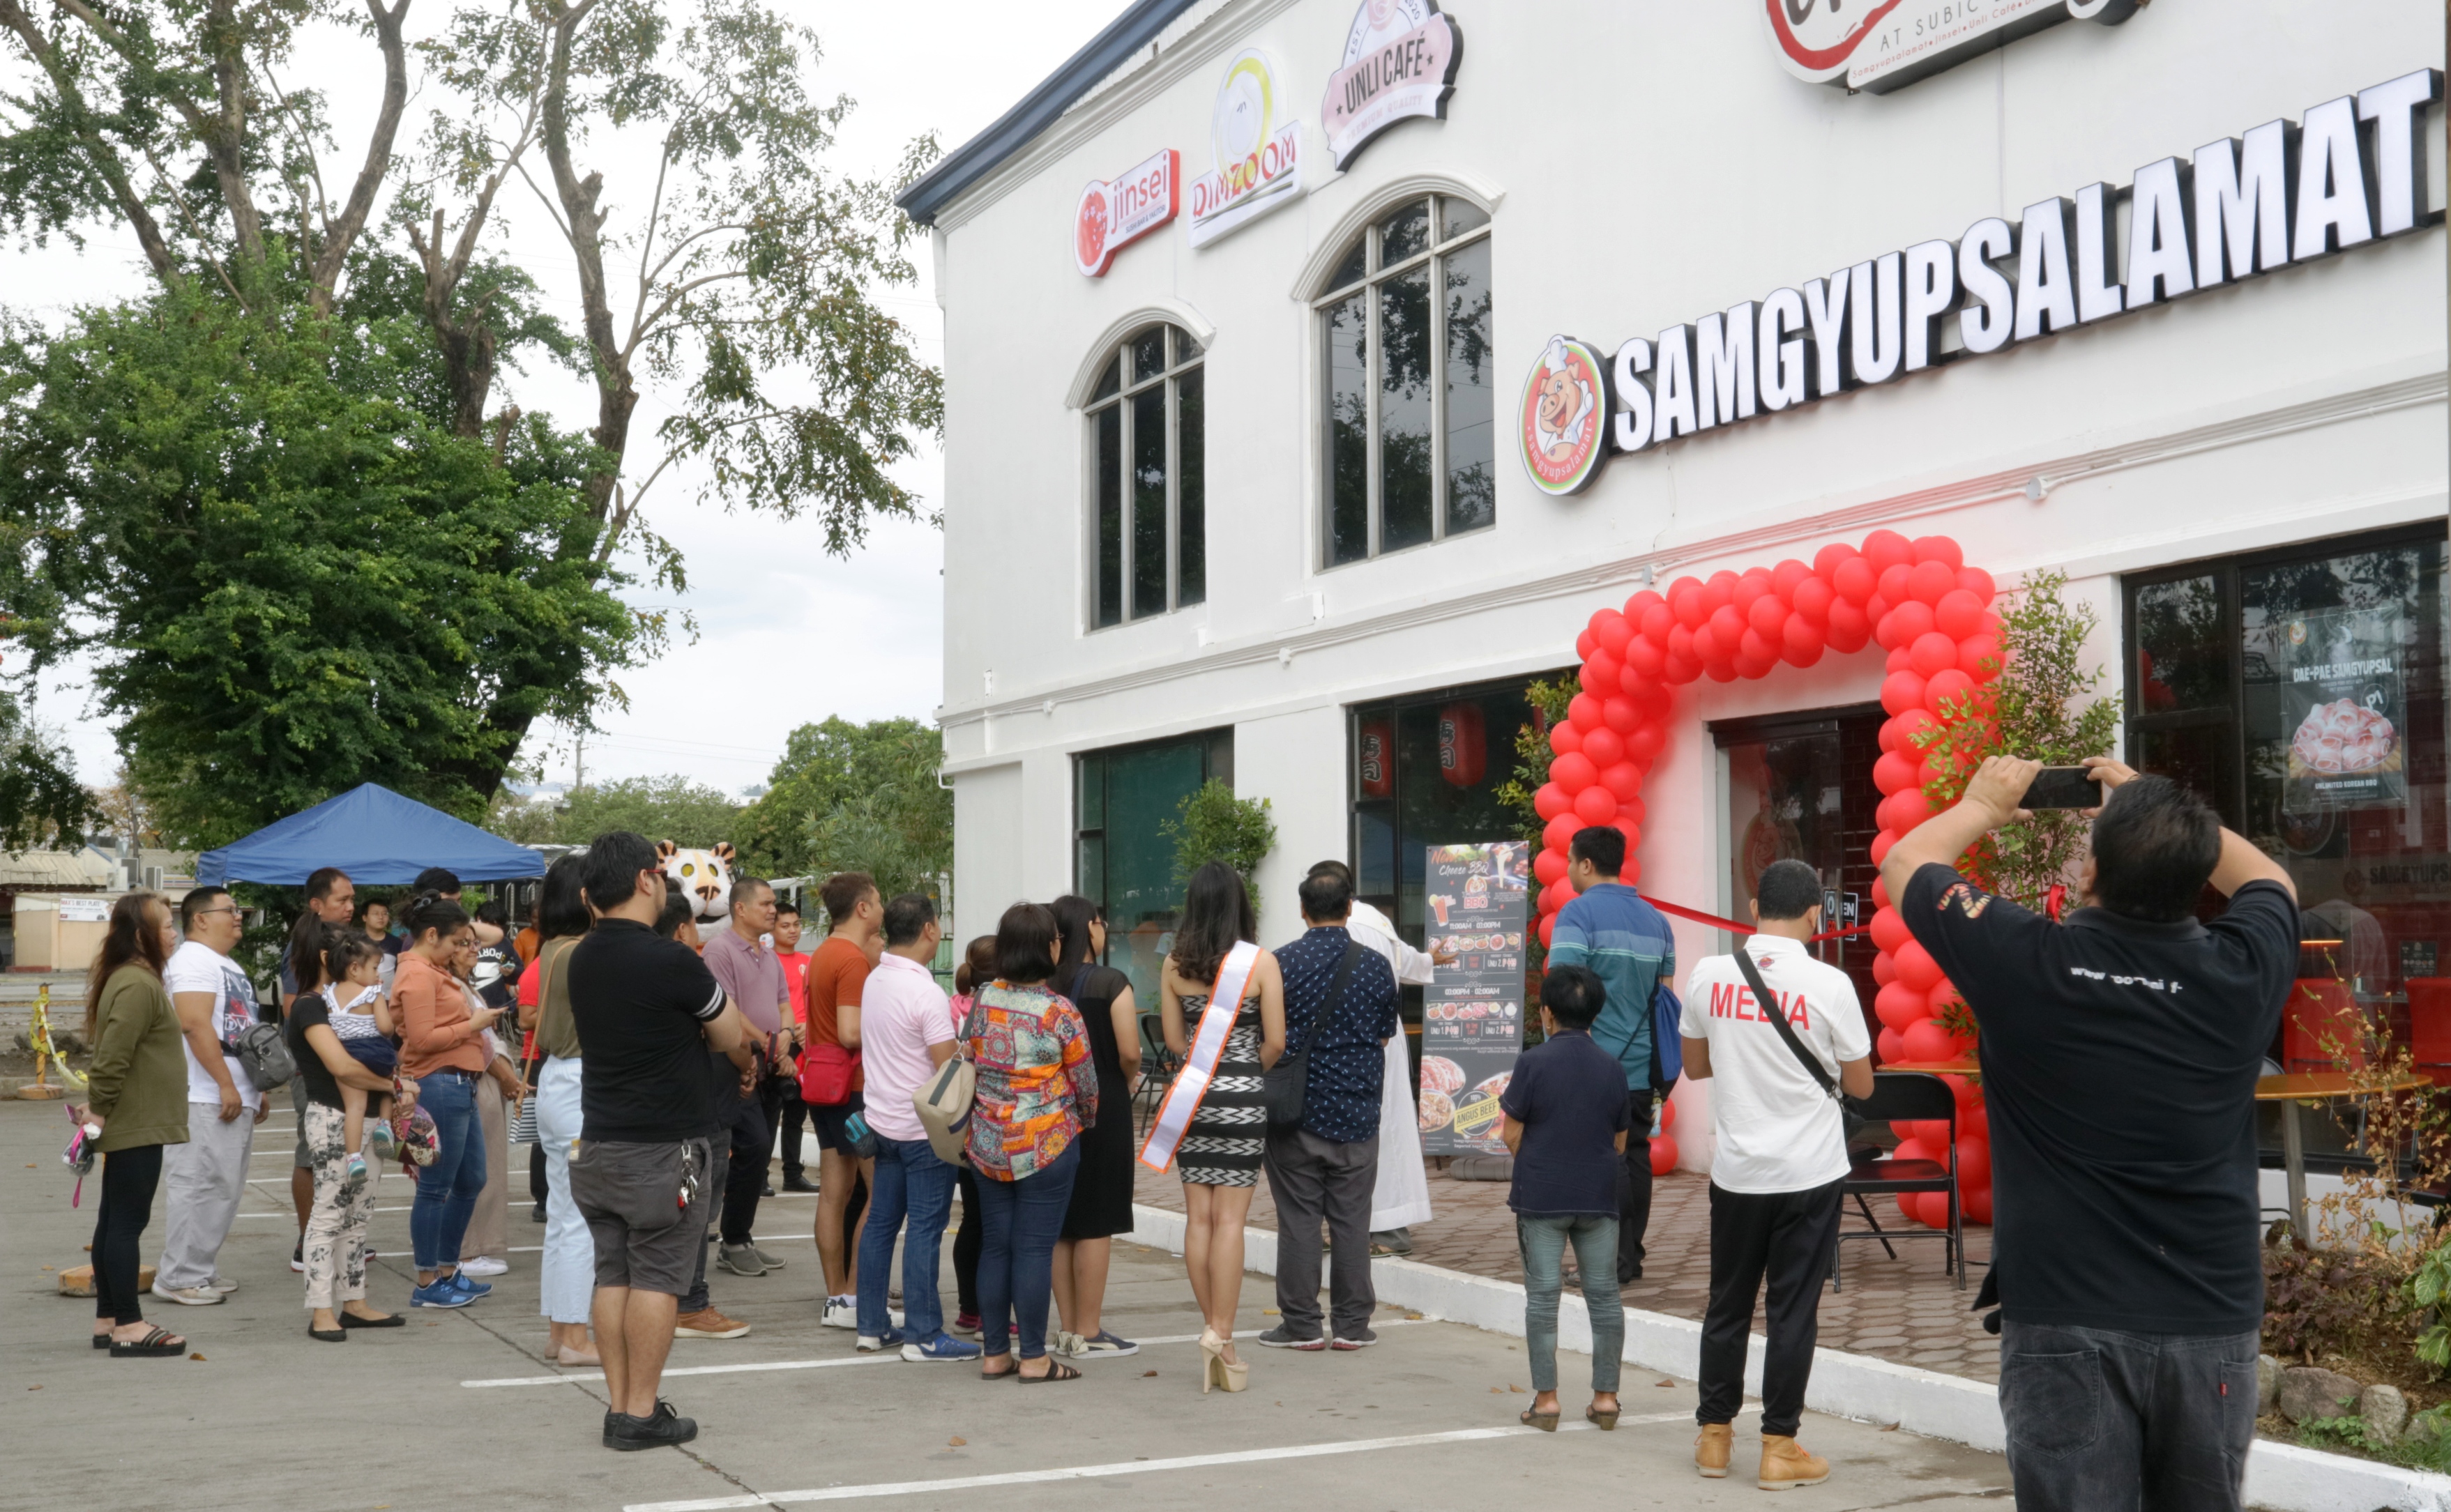 The popular UnliCity food hub opens its Subic Freeport branch at the Greenwoods Park district